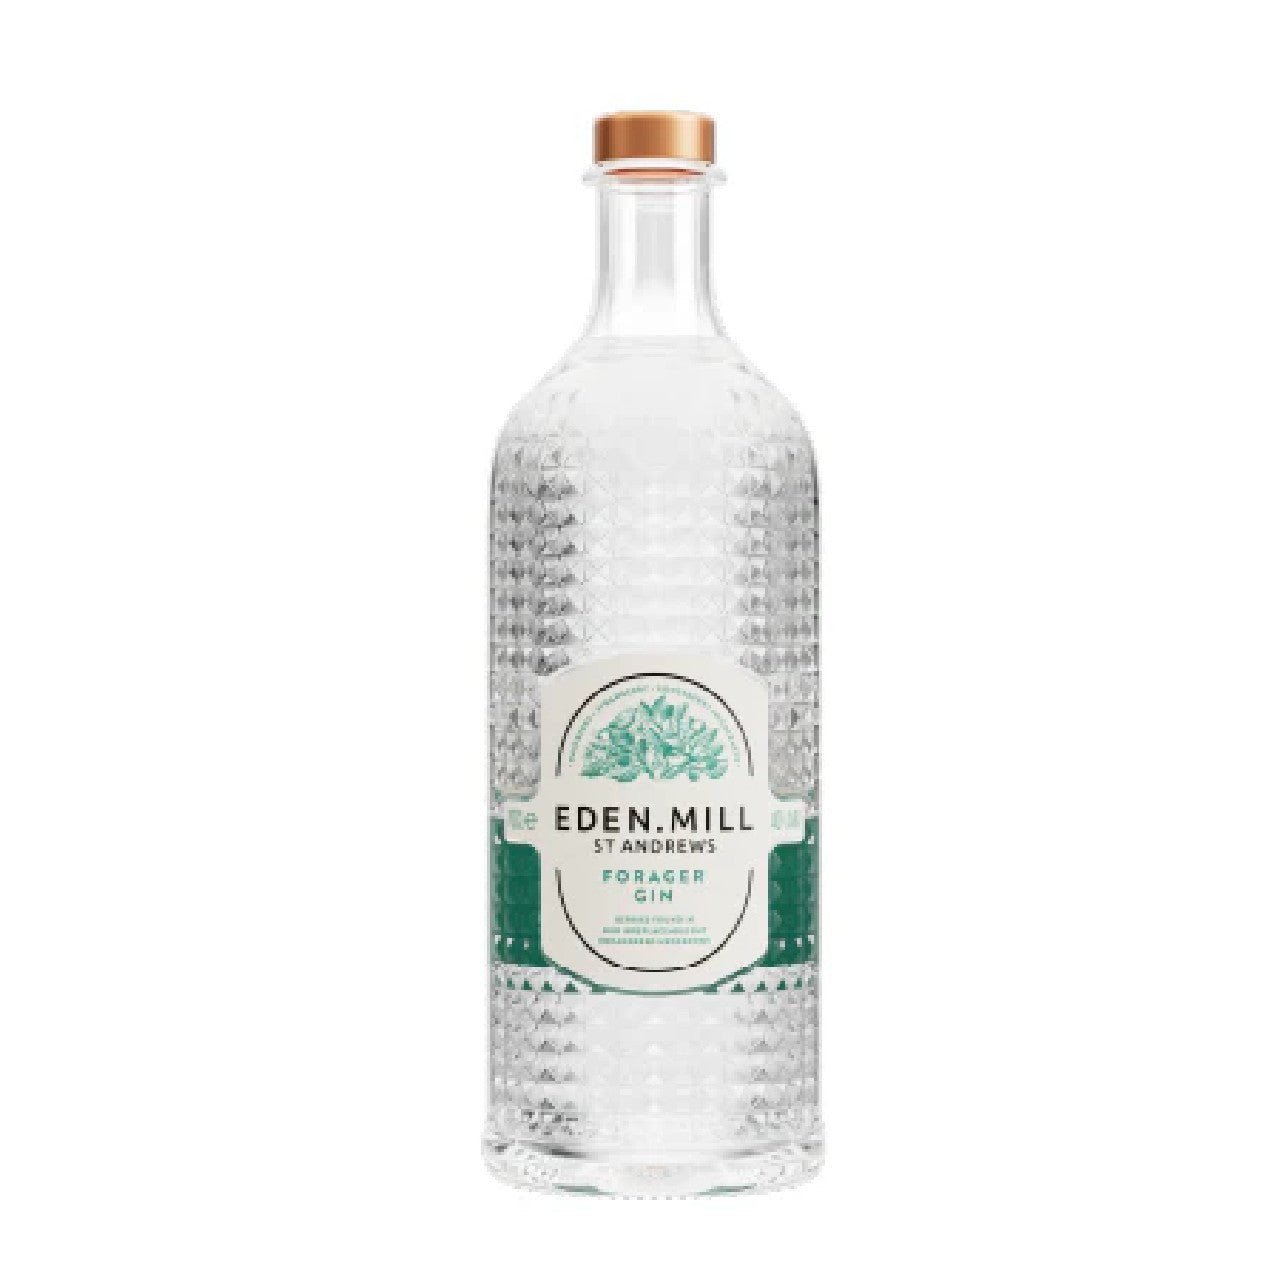 Eden Mill Forager Gin 700 40% - Gin UK - Liquor Wine Cave